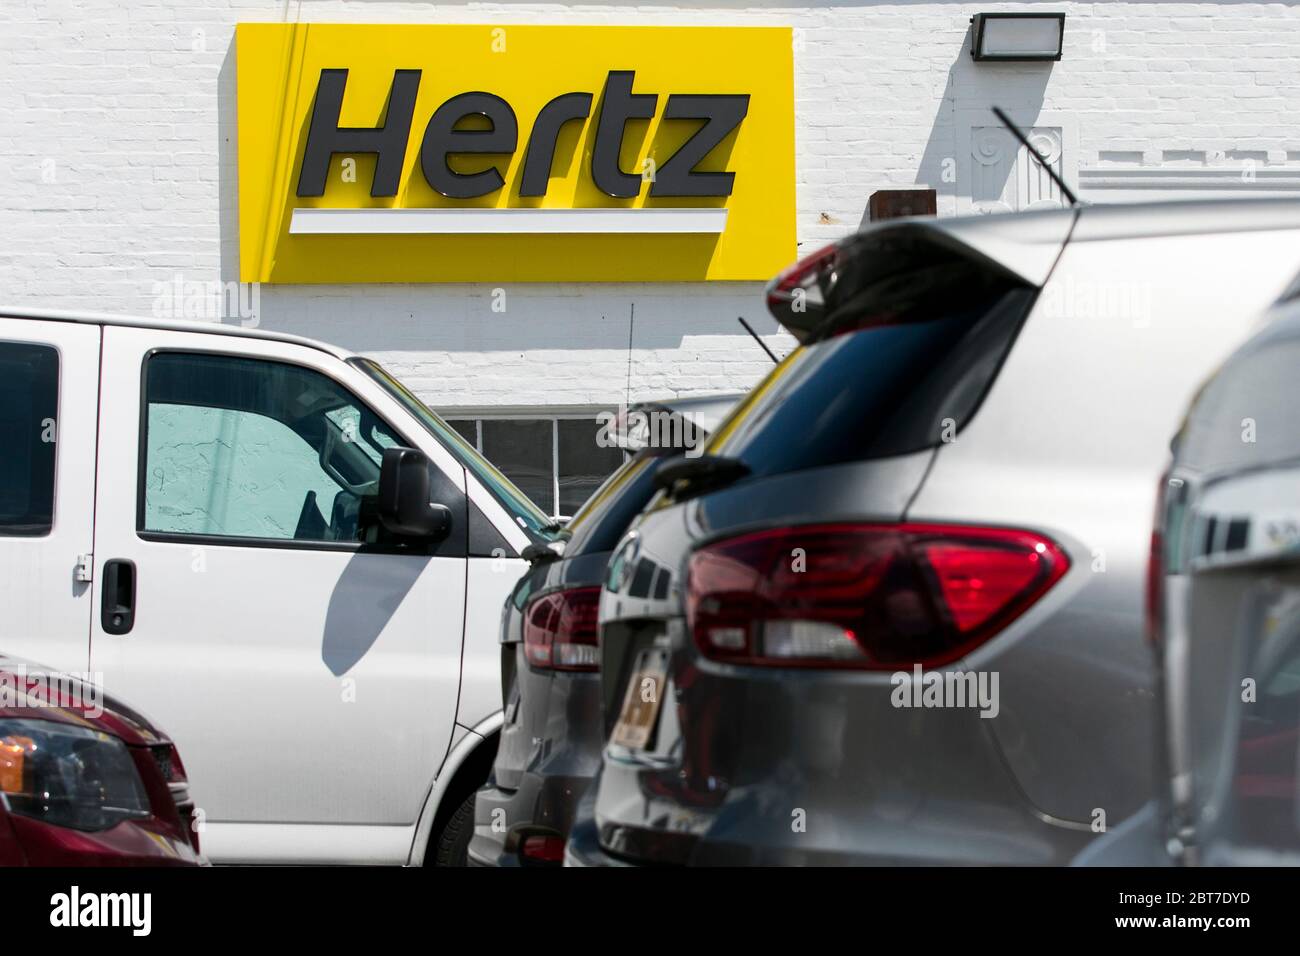 A logo sign outside of a Hertz car rental location in Silver Spring, Maryland on May 23, 2020. Stock Photo